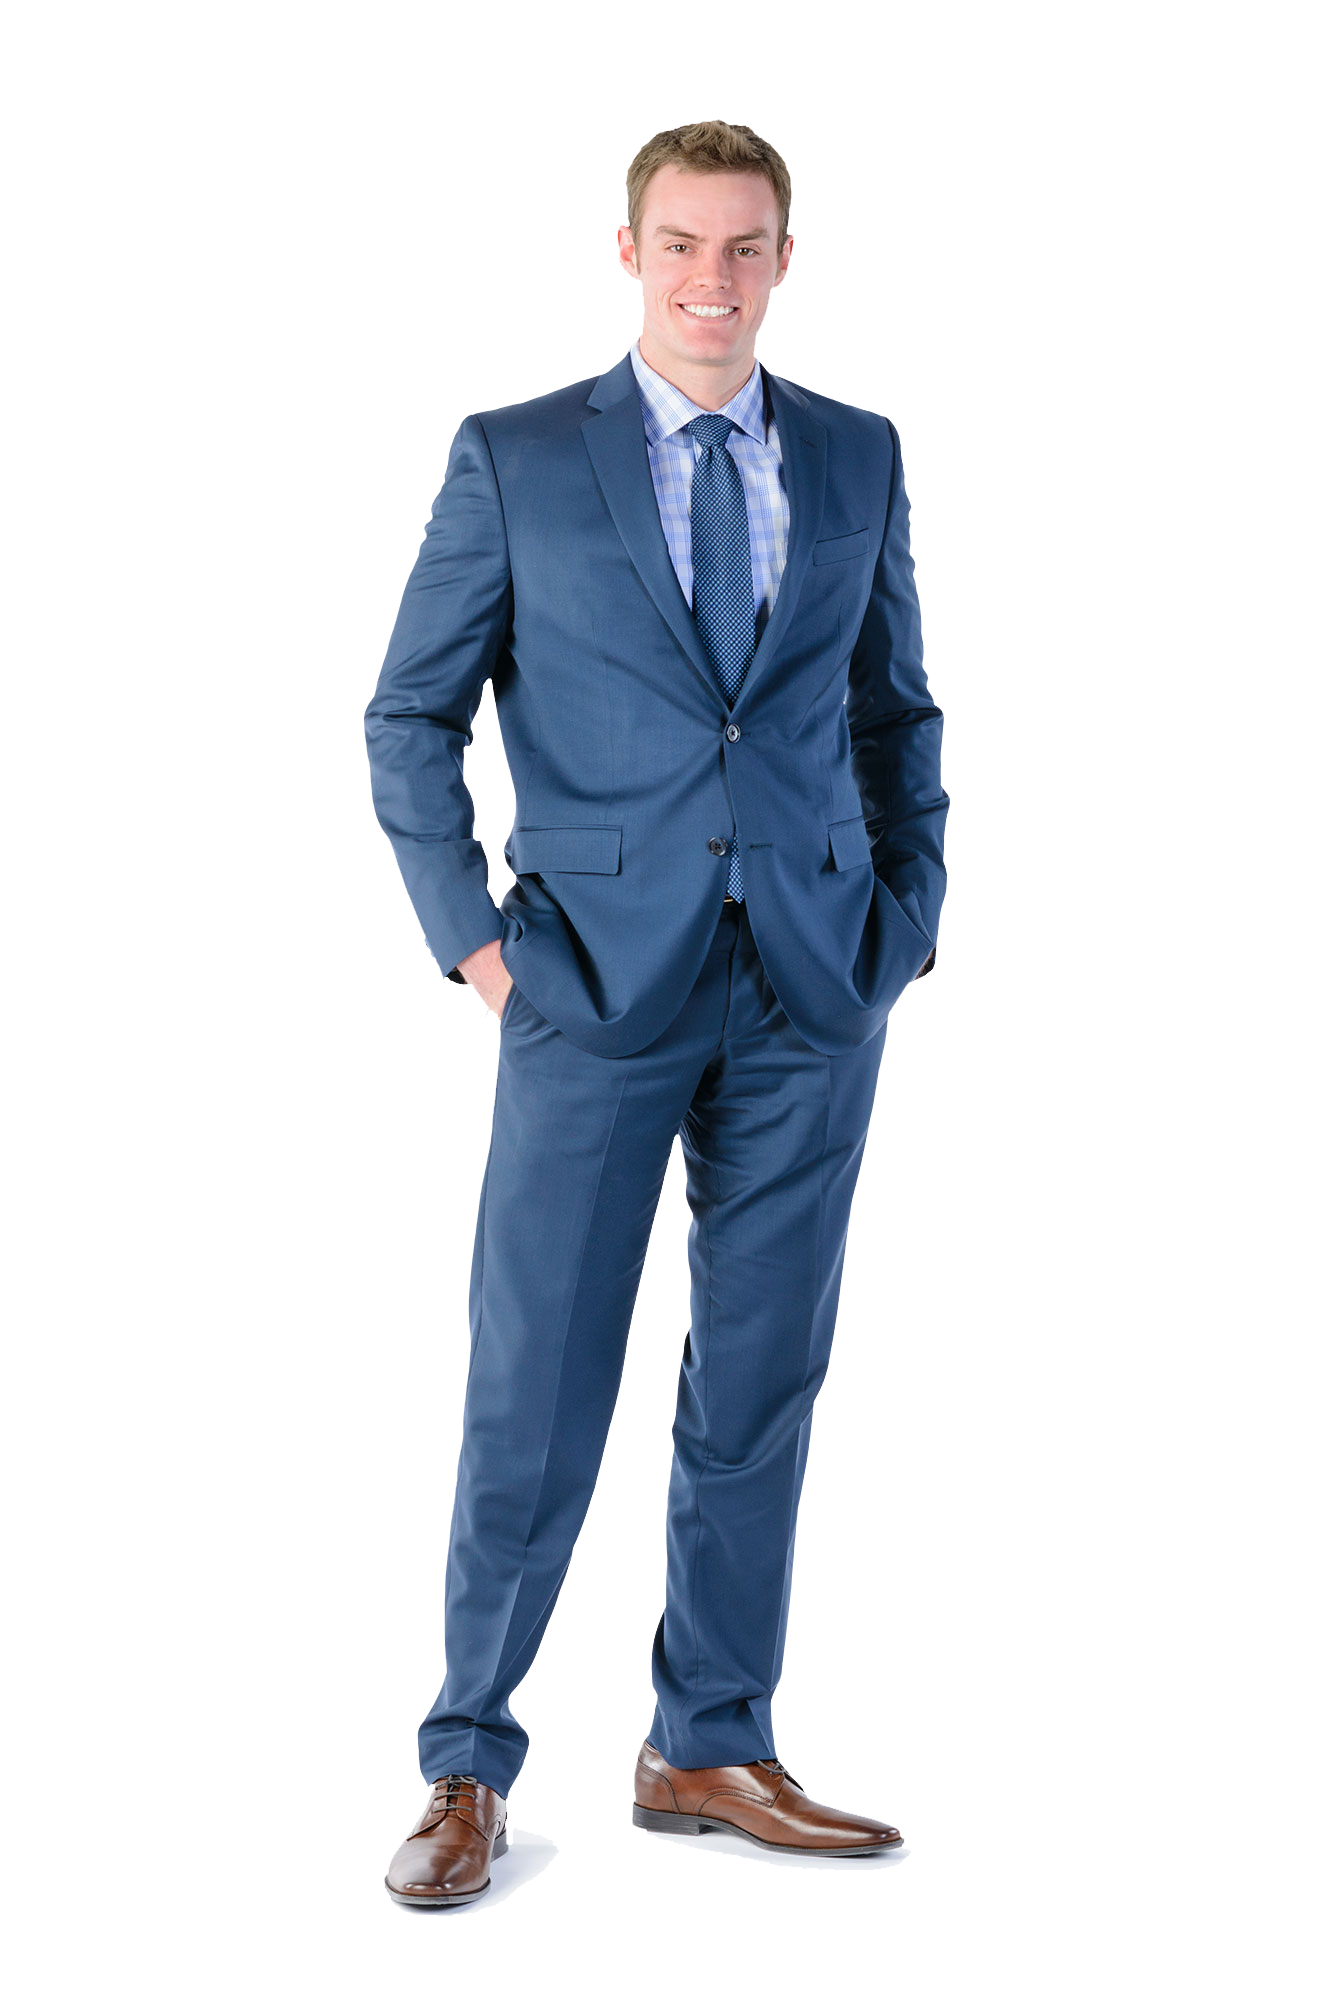 Standing Man Business Suit PNG Free Photo PNG Image